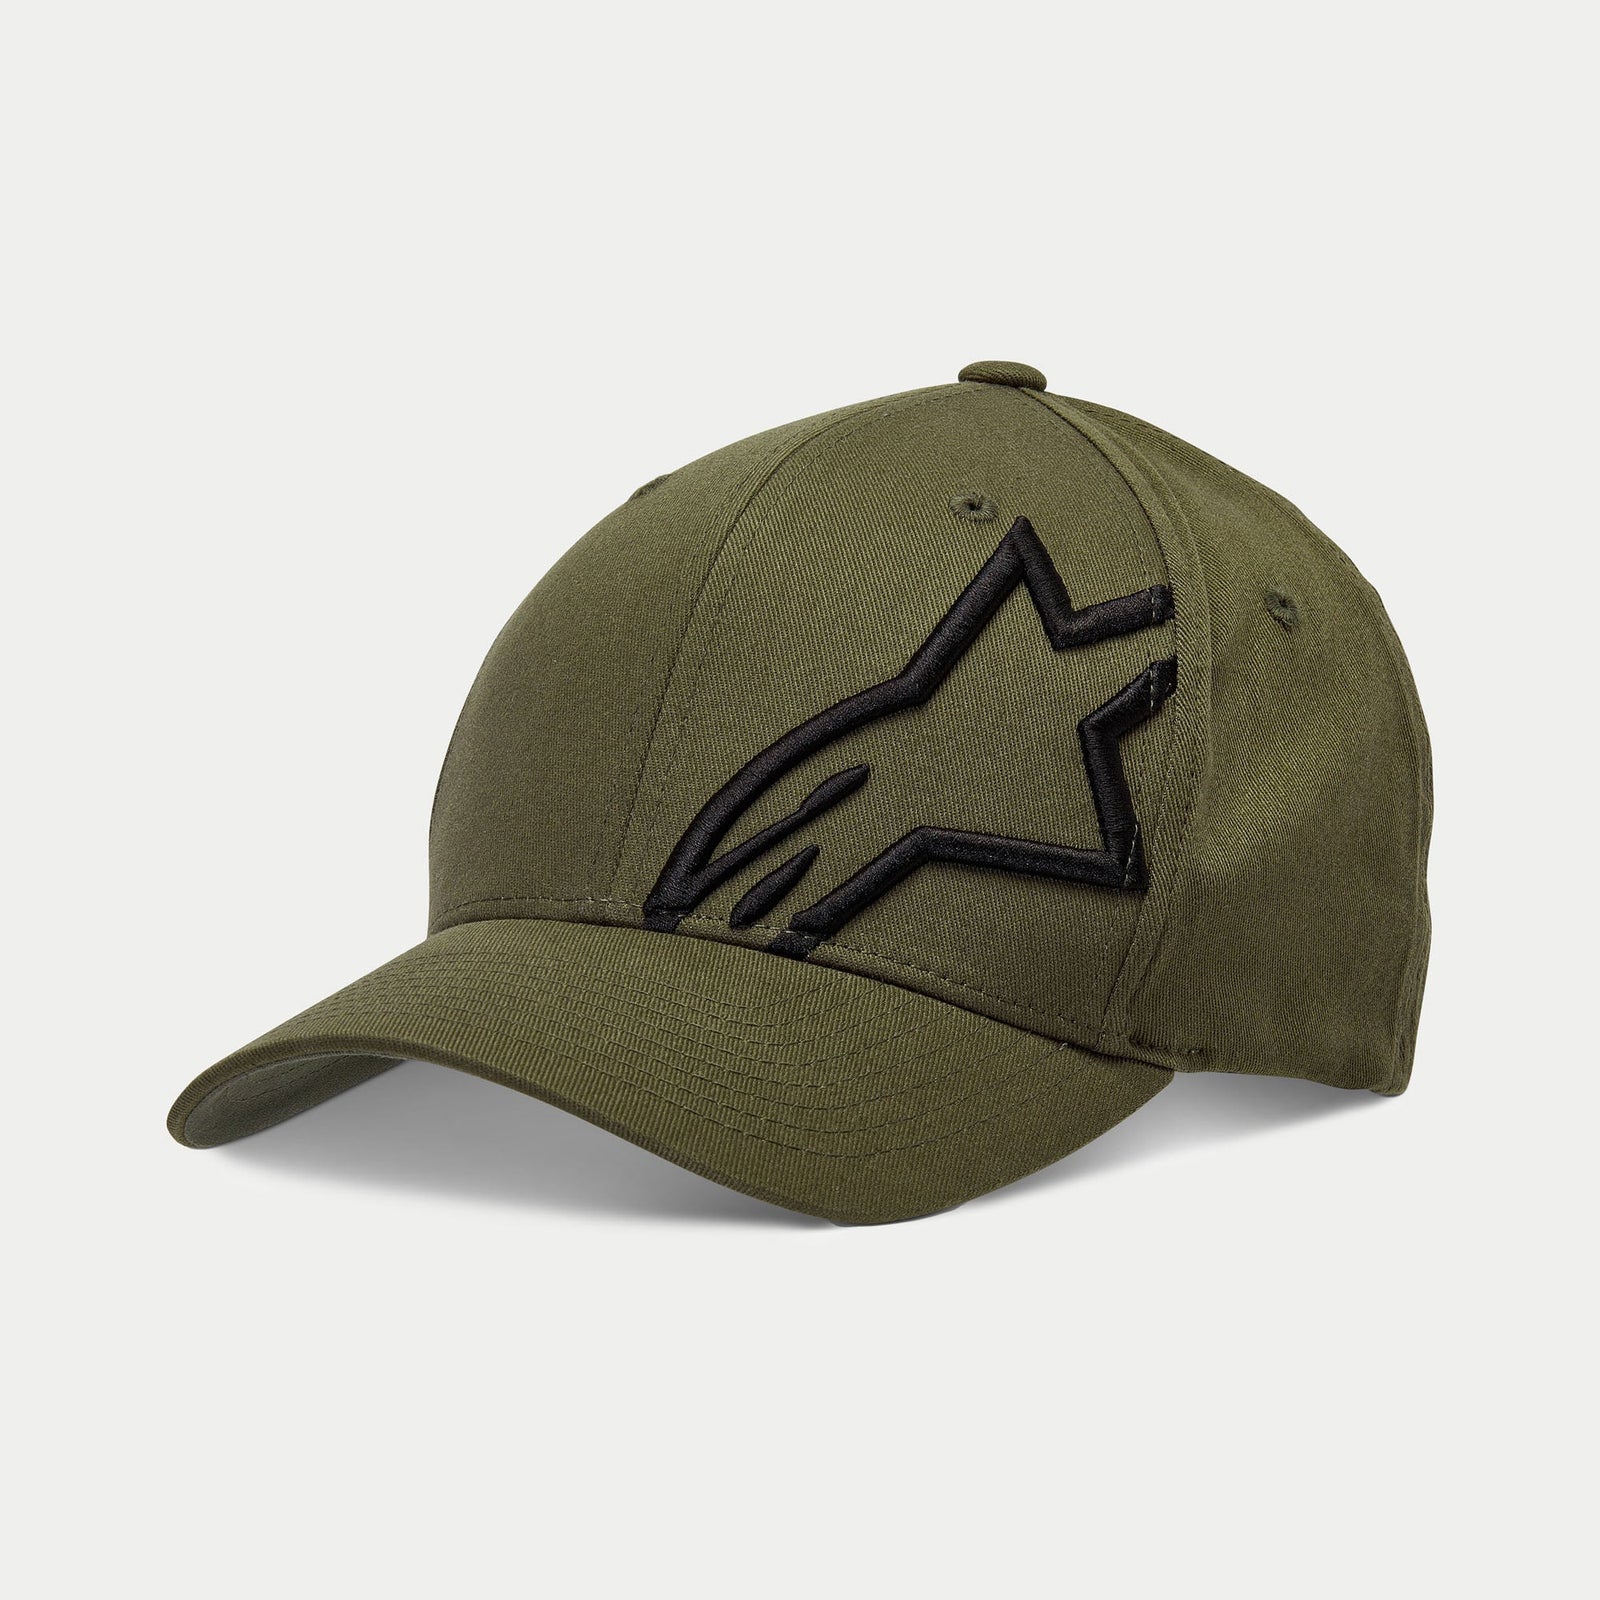 Corp Shift 2 Curved Bill Hat